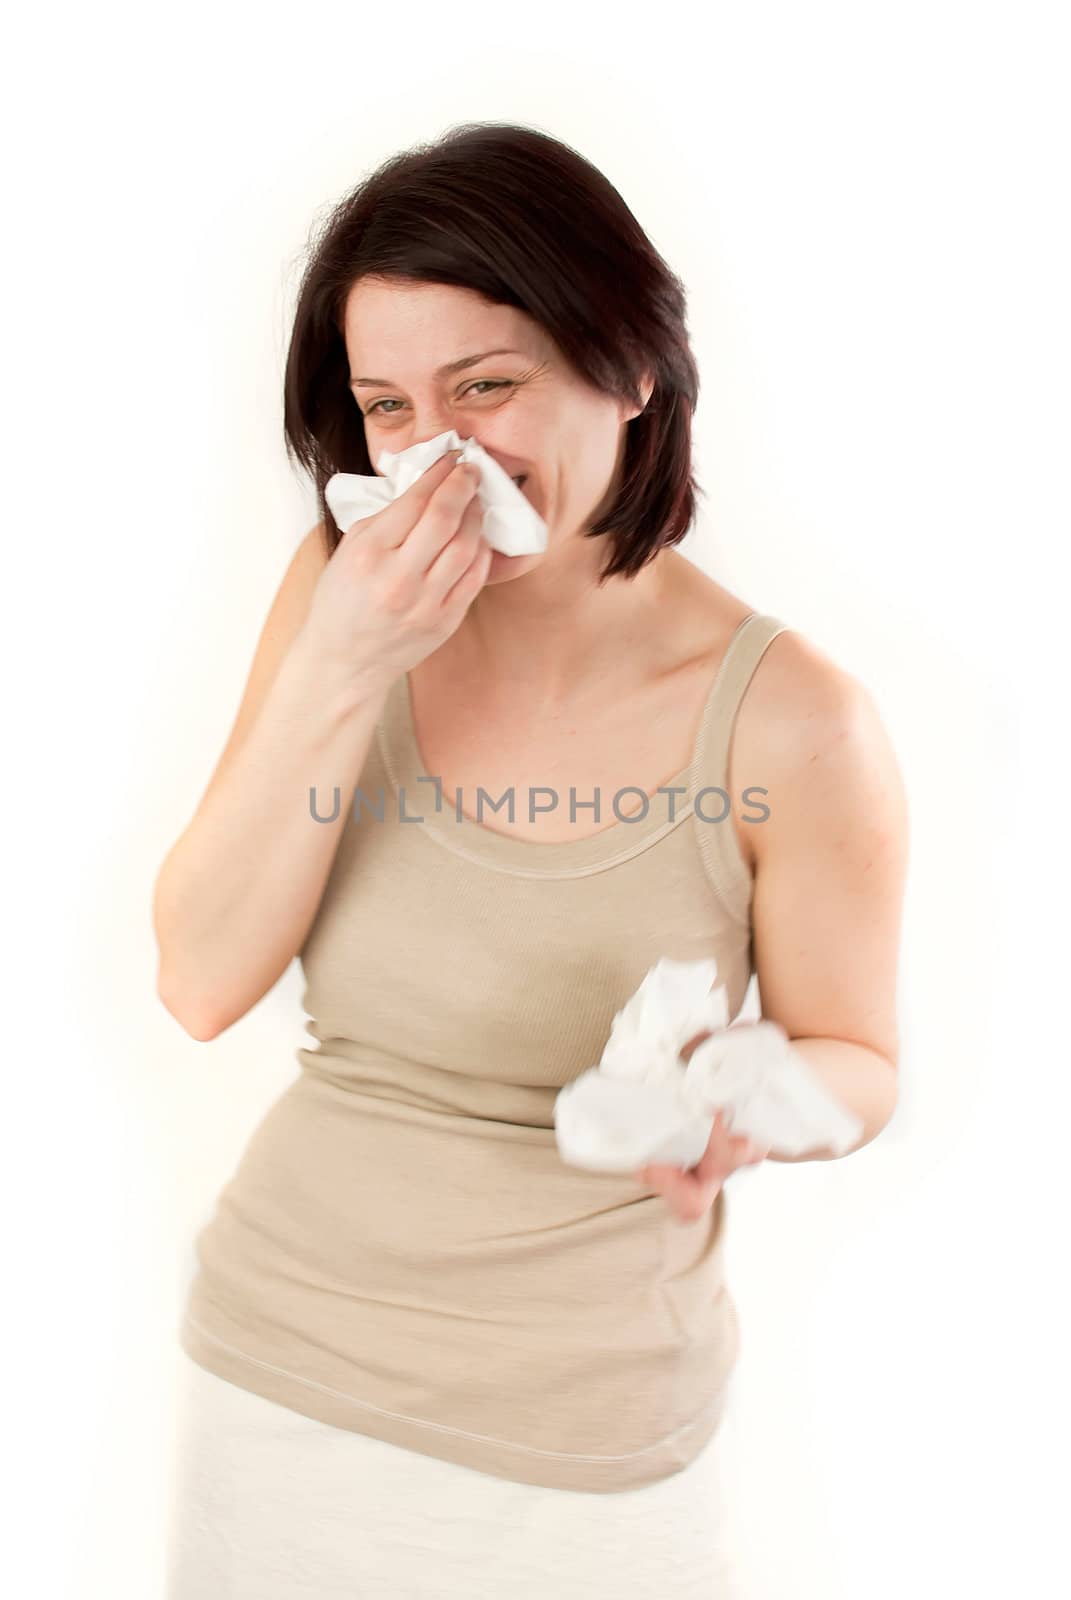 sneezing and laughing allergies ill woman with tissues